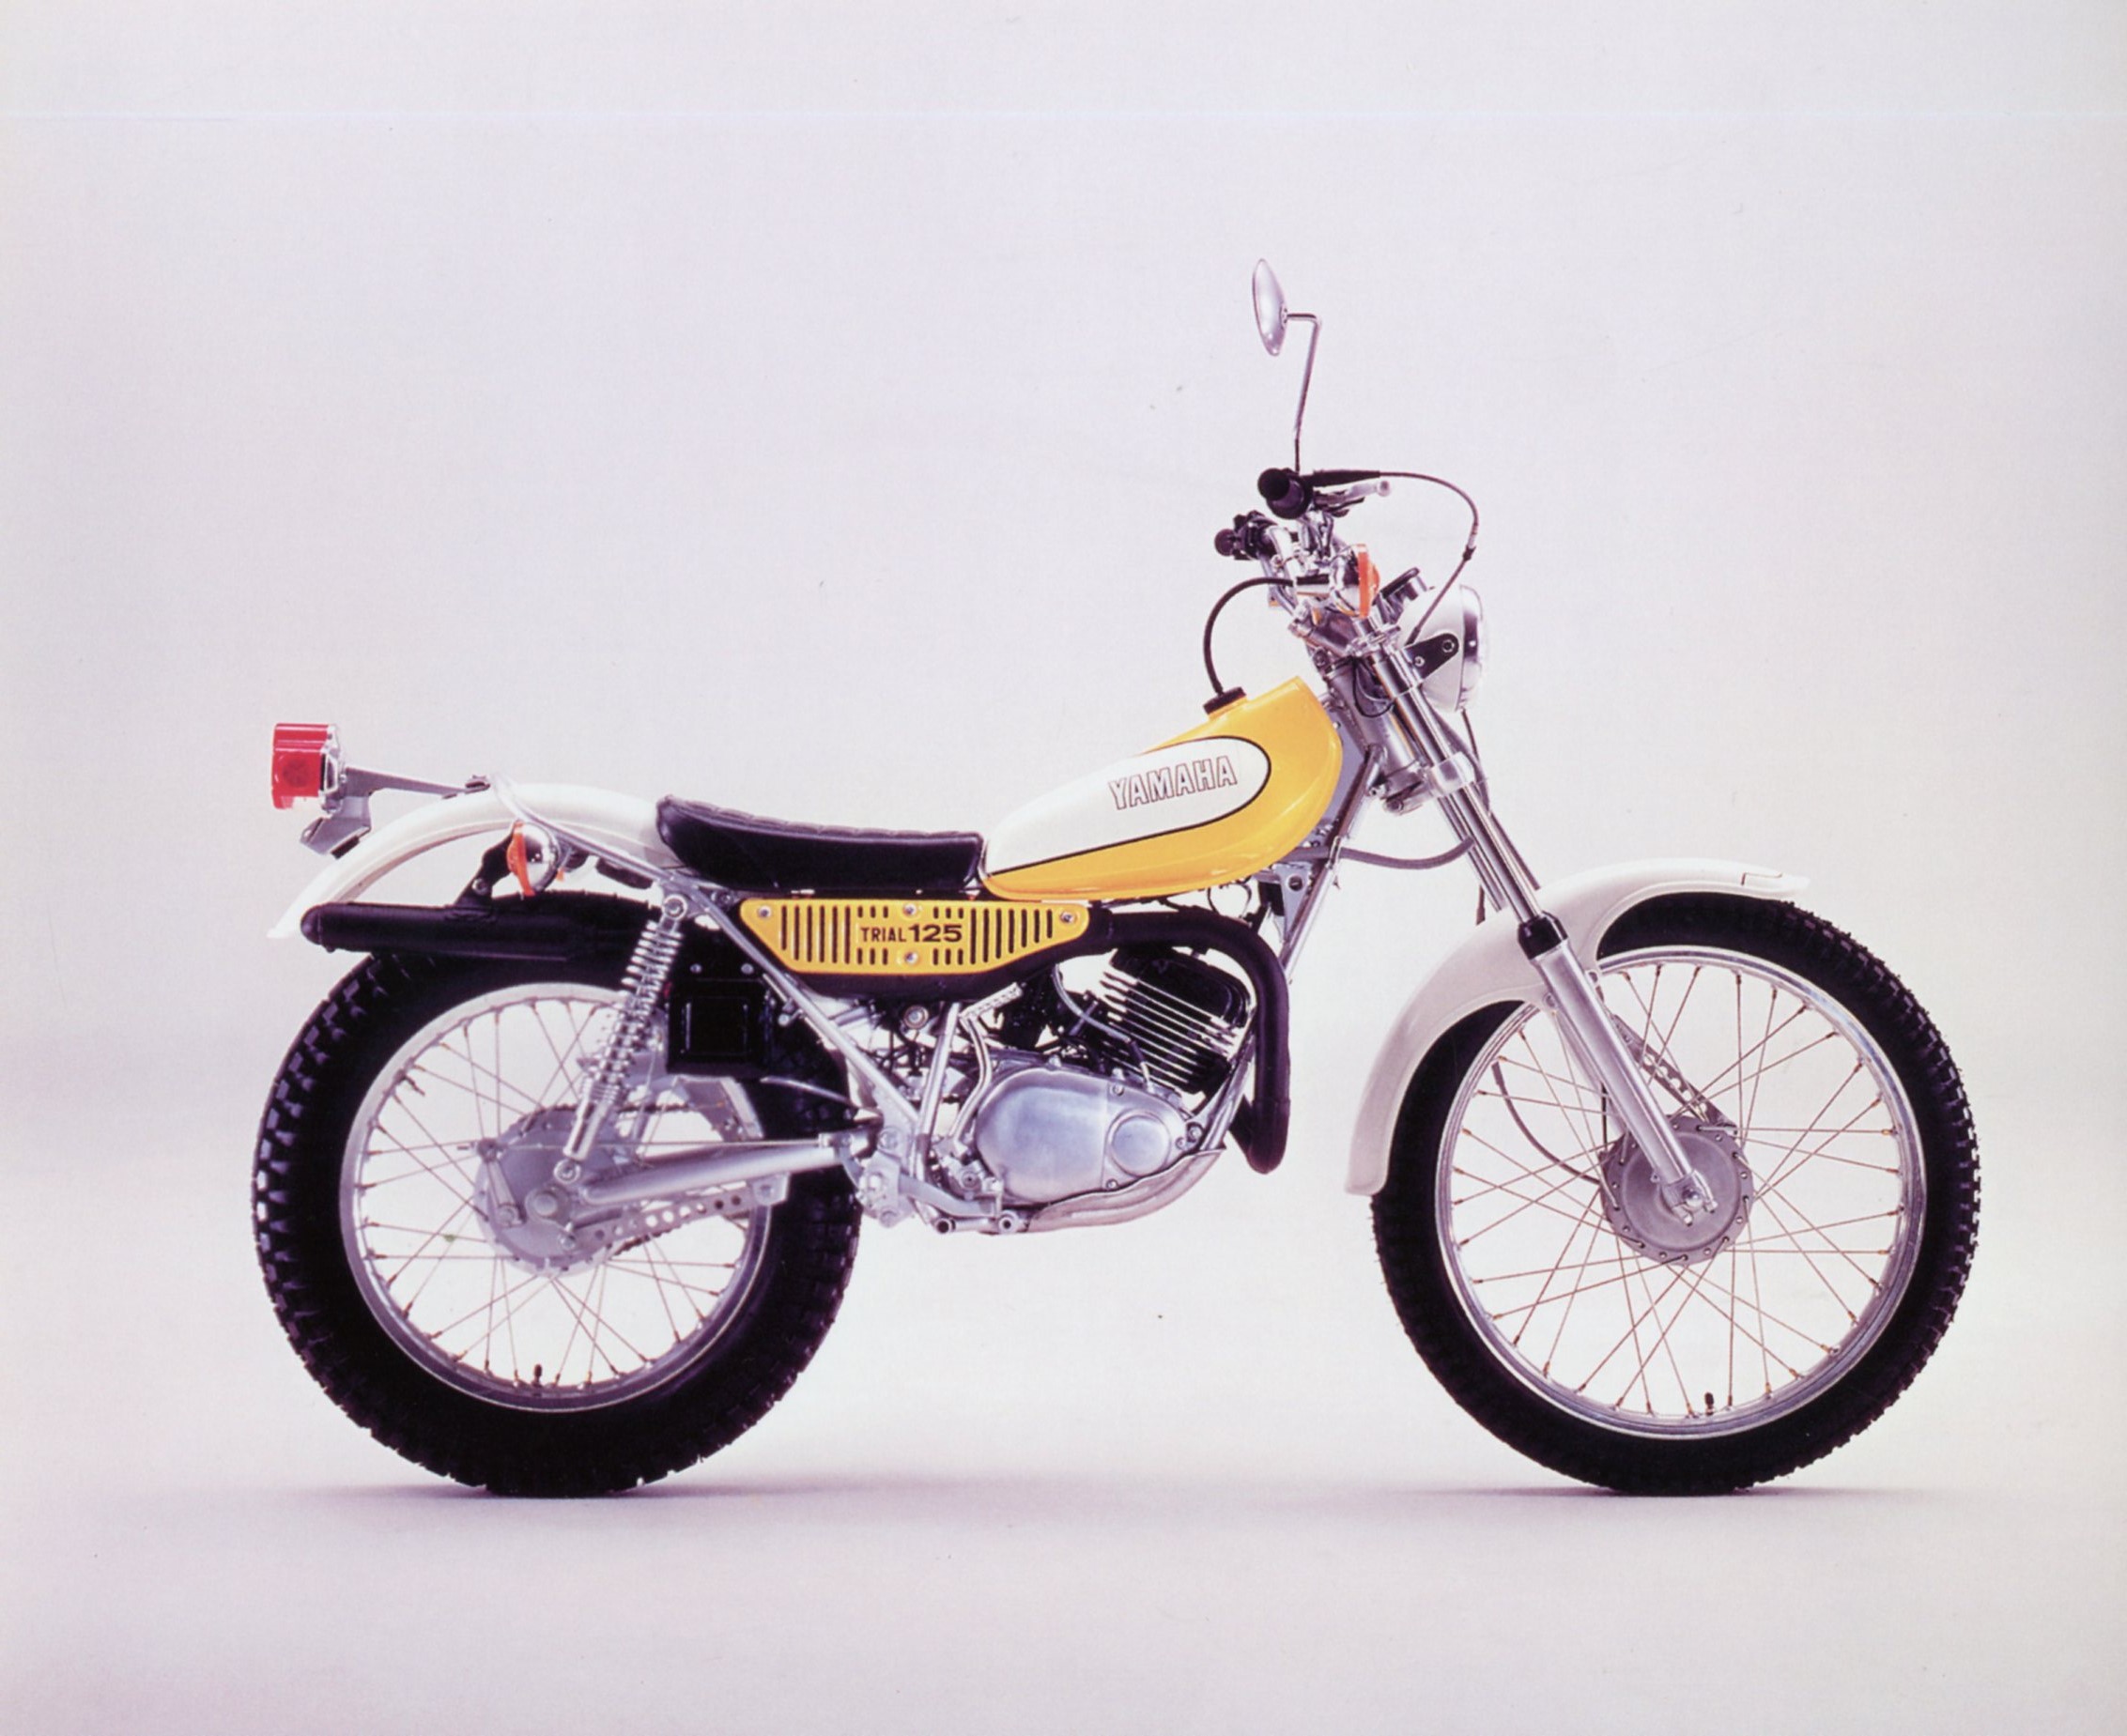 YAMAHA TY250 1974 - FICHE MOTO TRIAL TY CARACTÉRISTIQUES